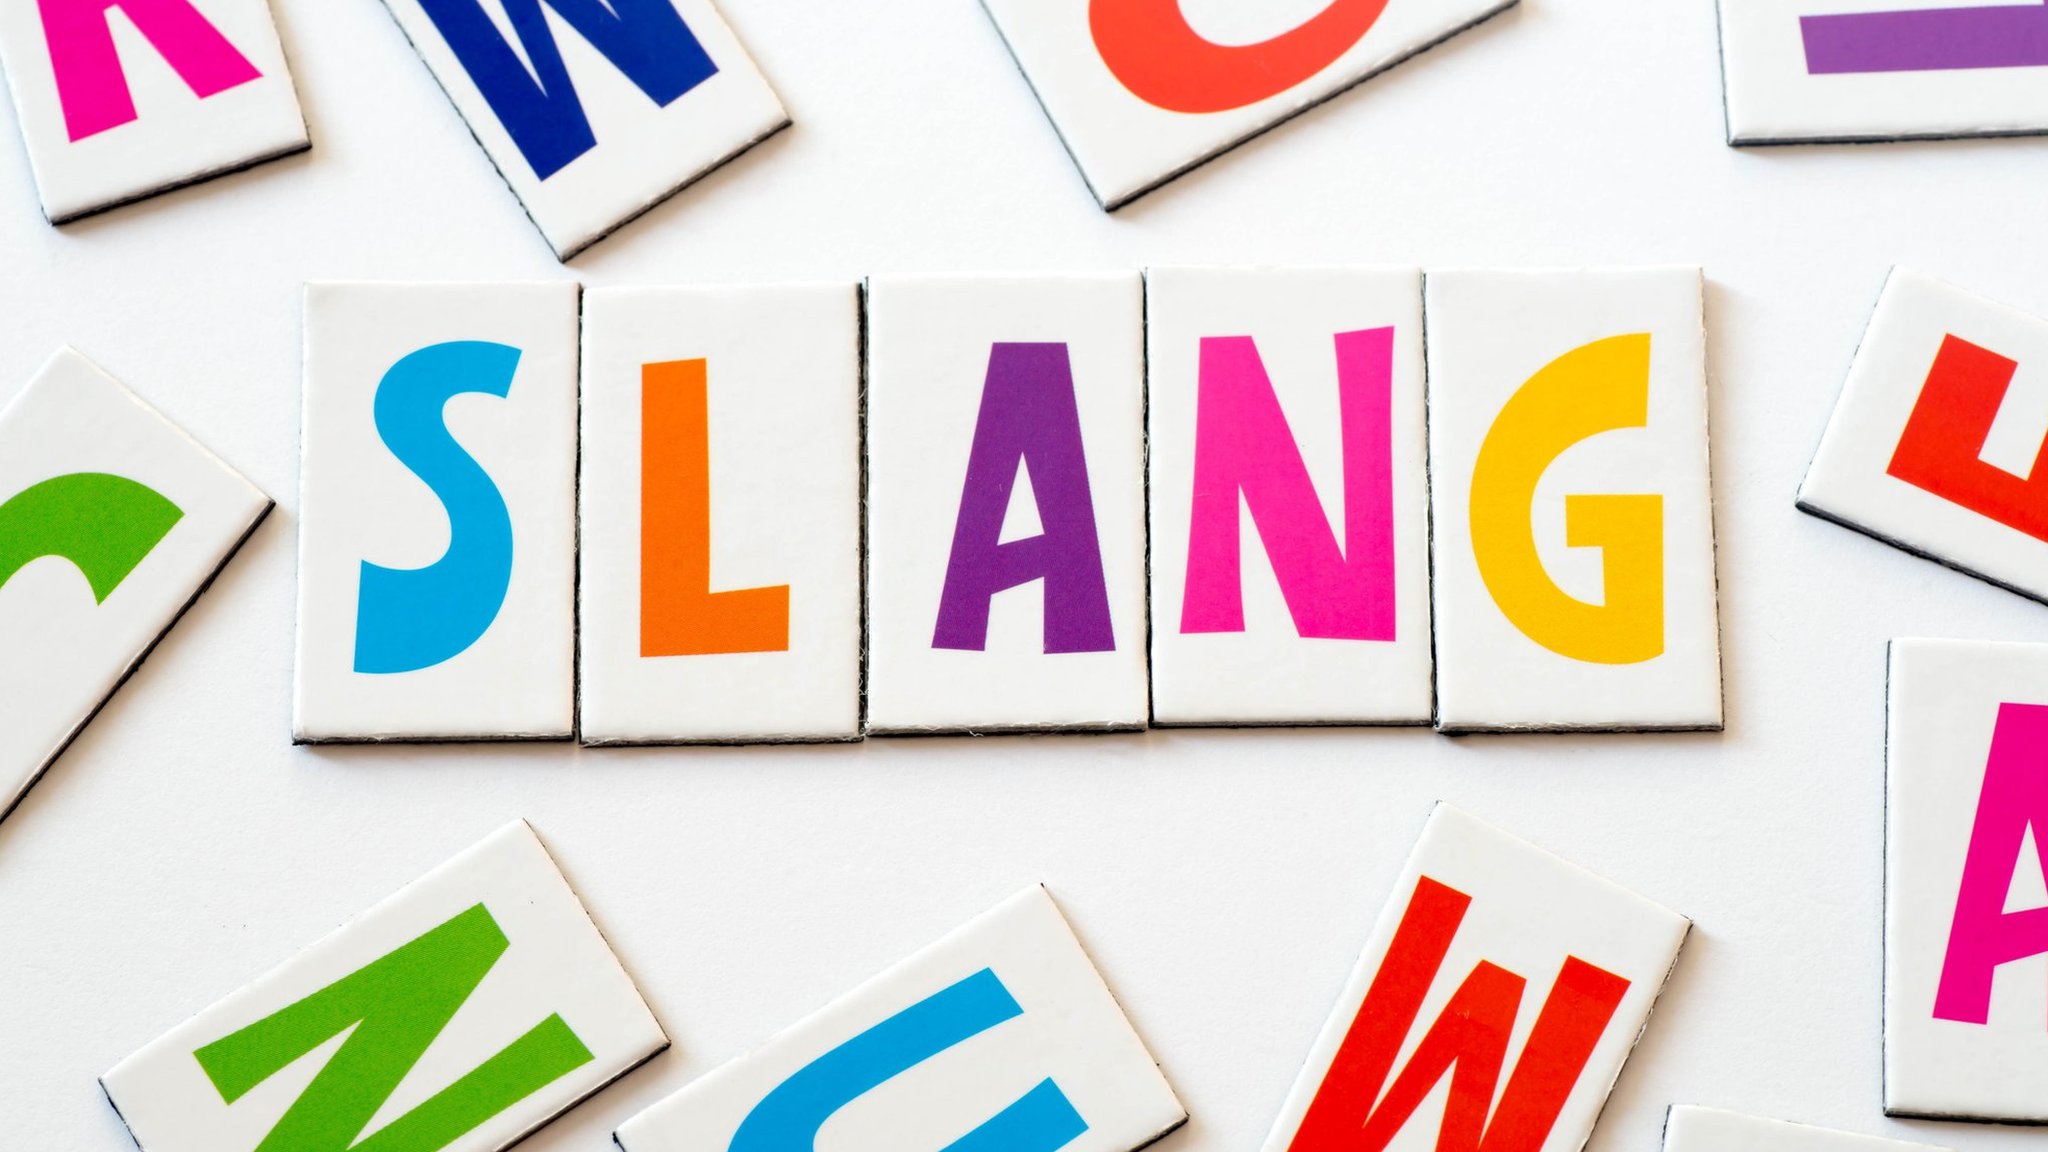 Say It Ain't So – Social Media Could Allow Slang To Become Accepted Grammar